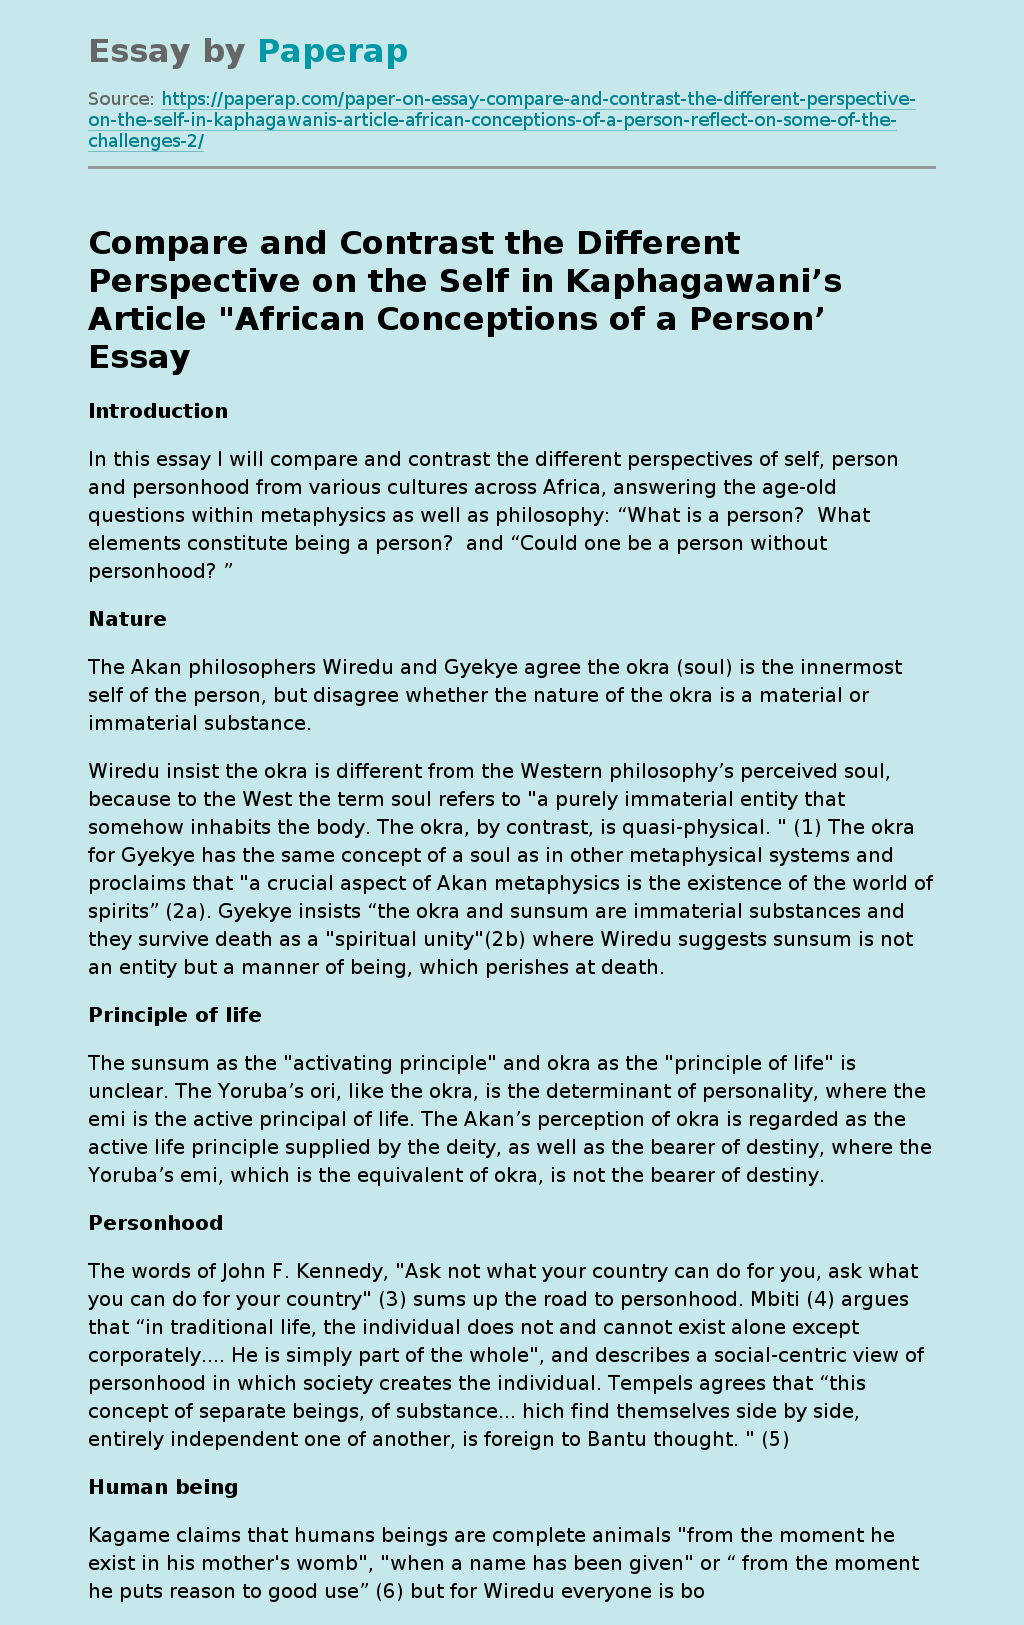 Perspectives on the Self in African Conceptions